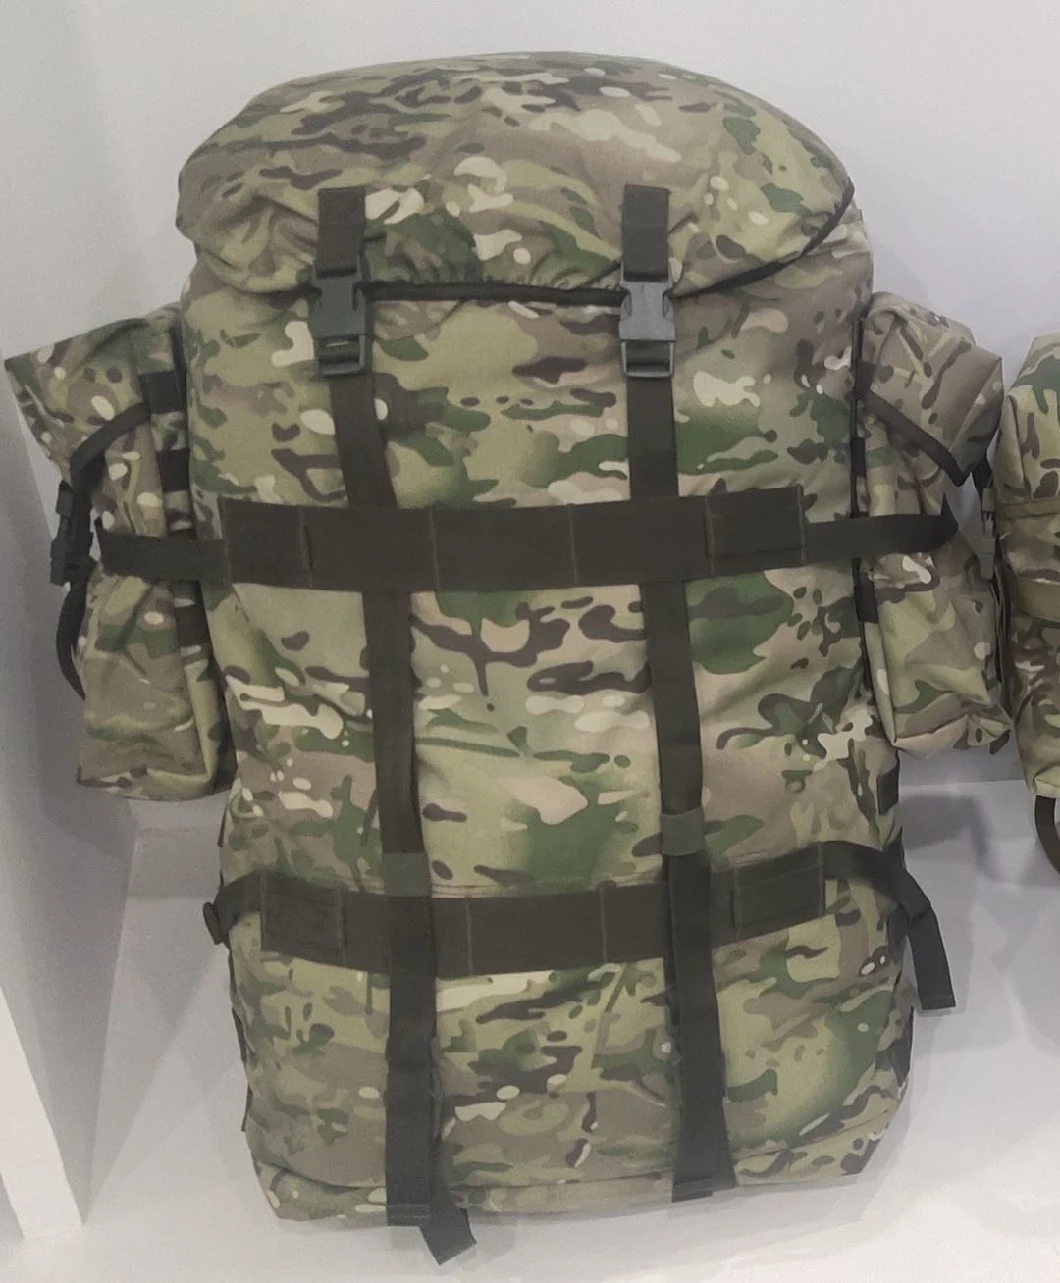 Camouflage Army Camping Bags Outdoor Waterproof Military Tactical Backpack